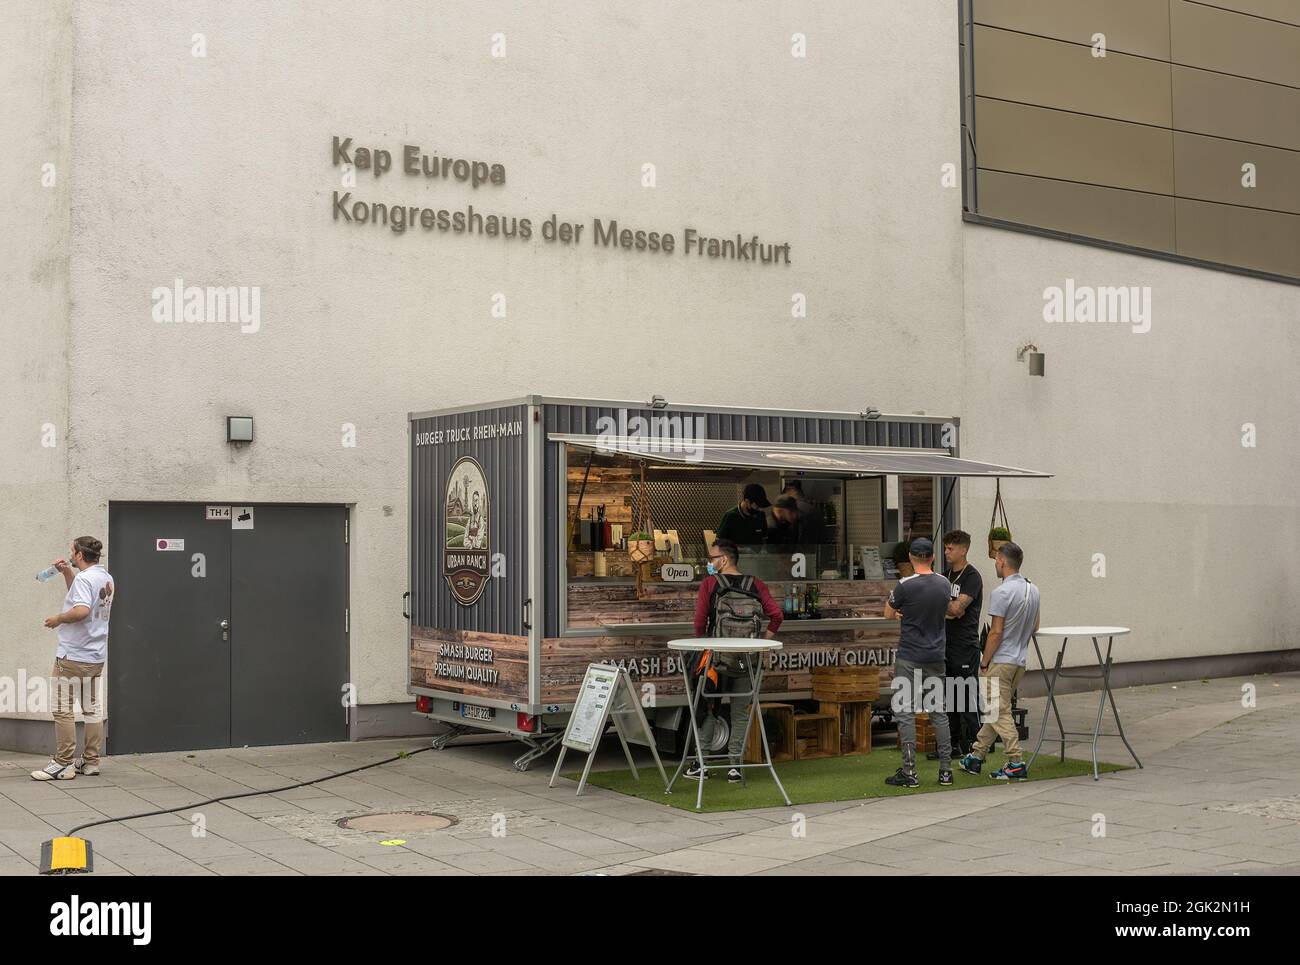 Food truck with customers in front of the exhibition center, Frankfurt, Germany Stock Photo